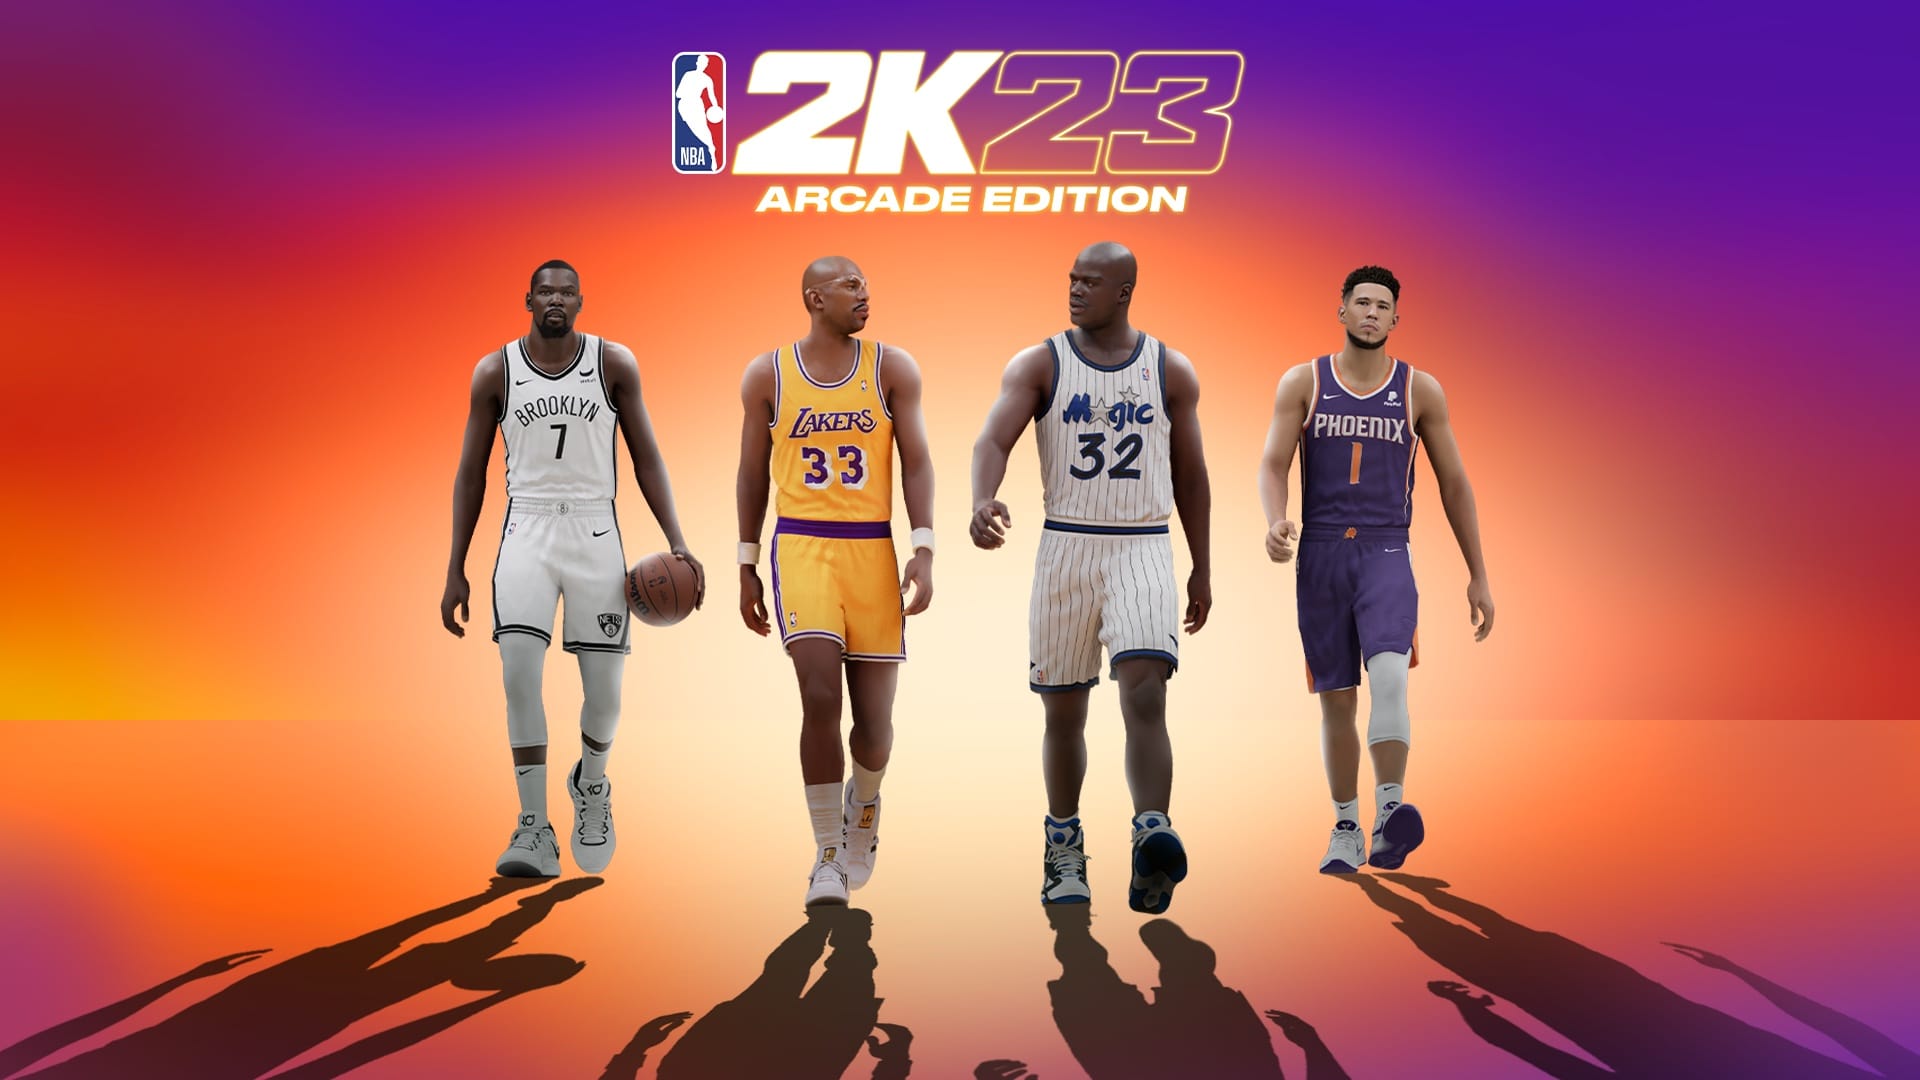 Basketball fans can jump into the action in 'NBA 2K23' on Apple Arcade